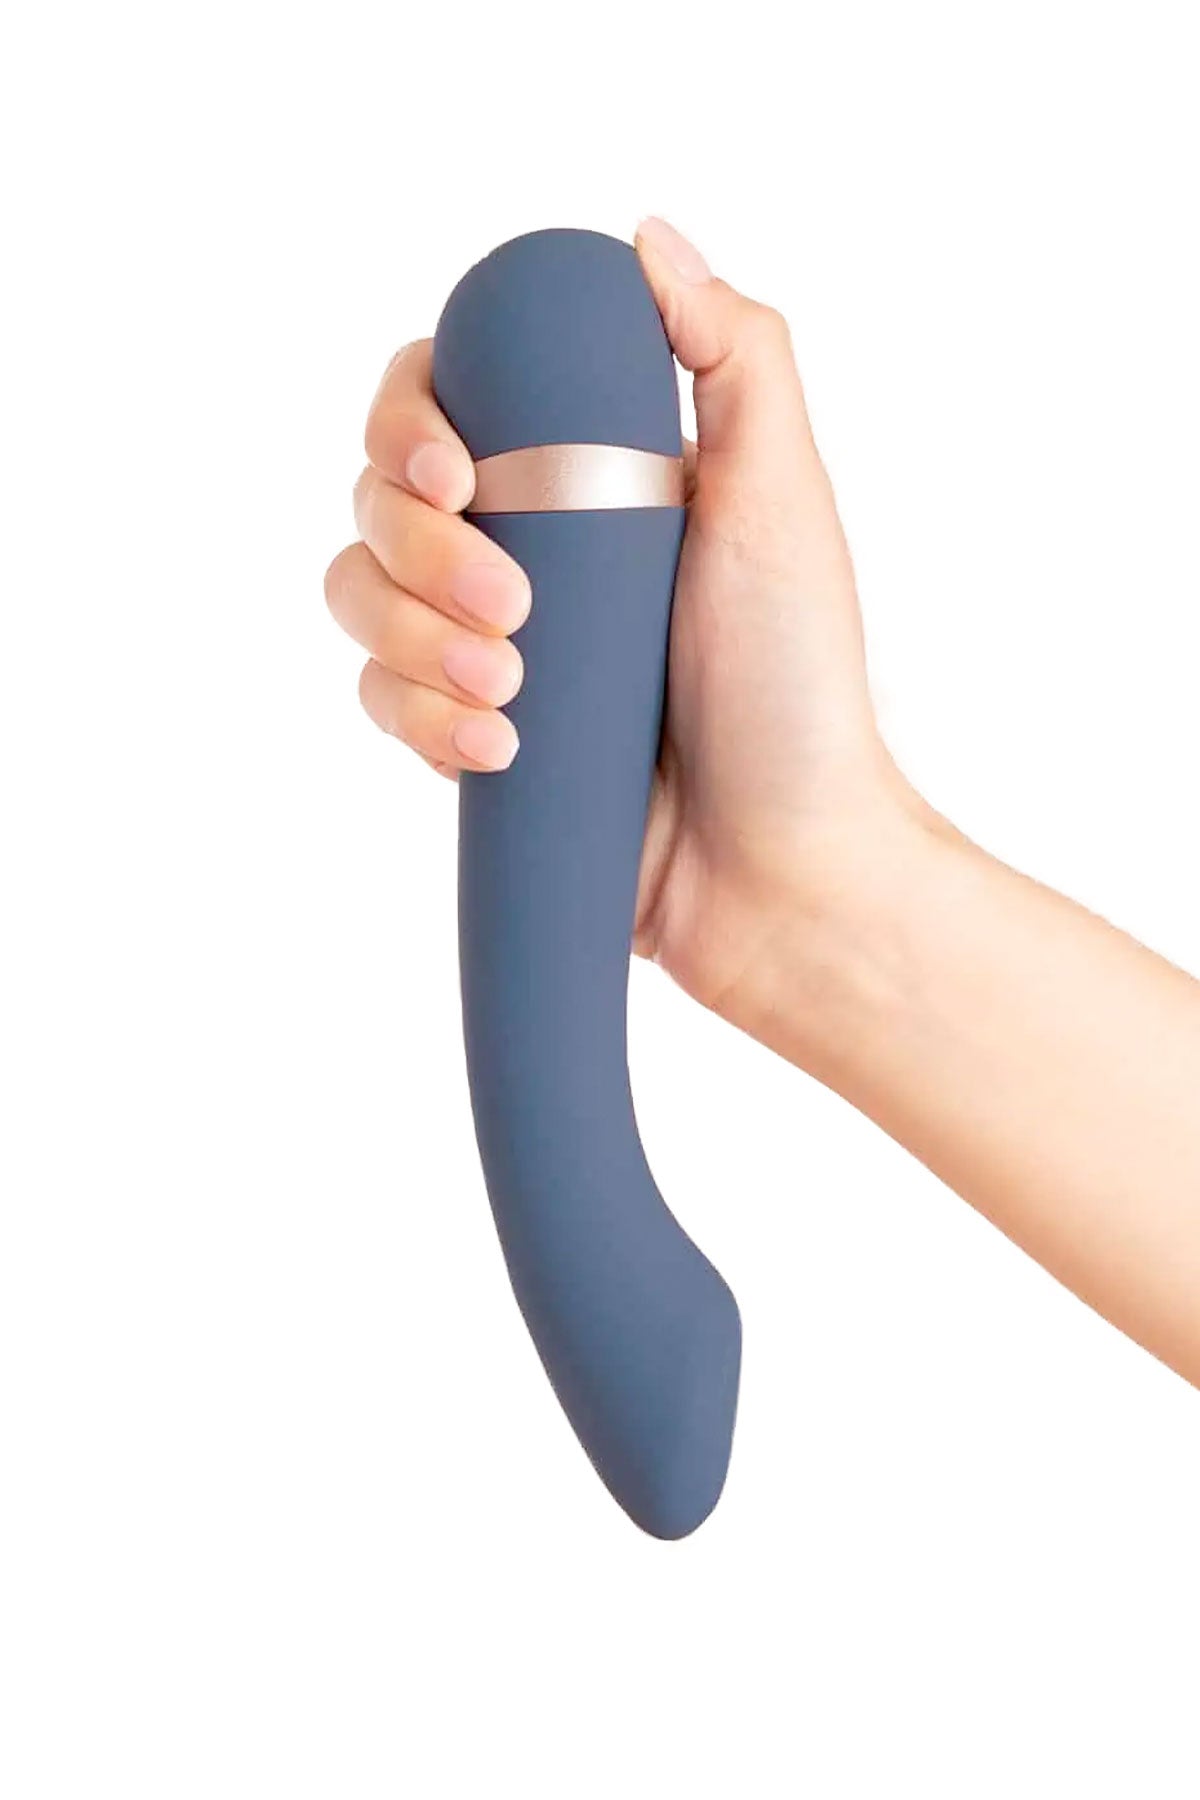 The Hot and Cold | G-Spot Vibrator